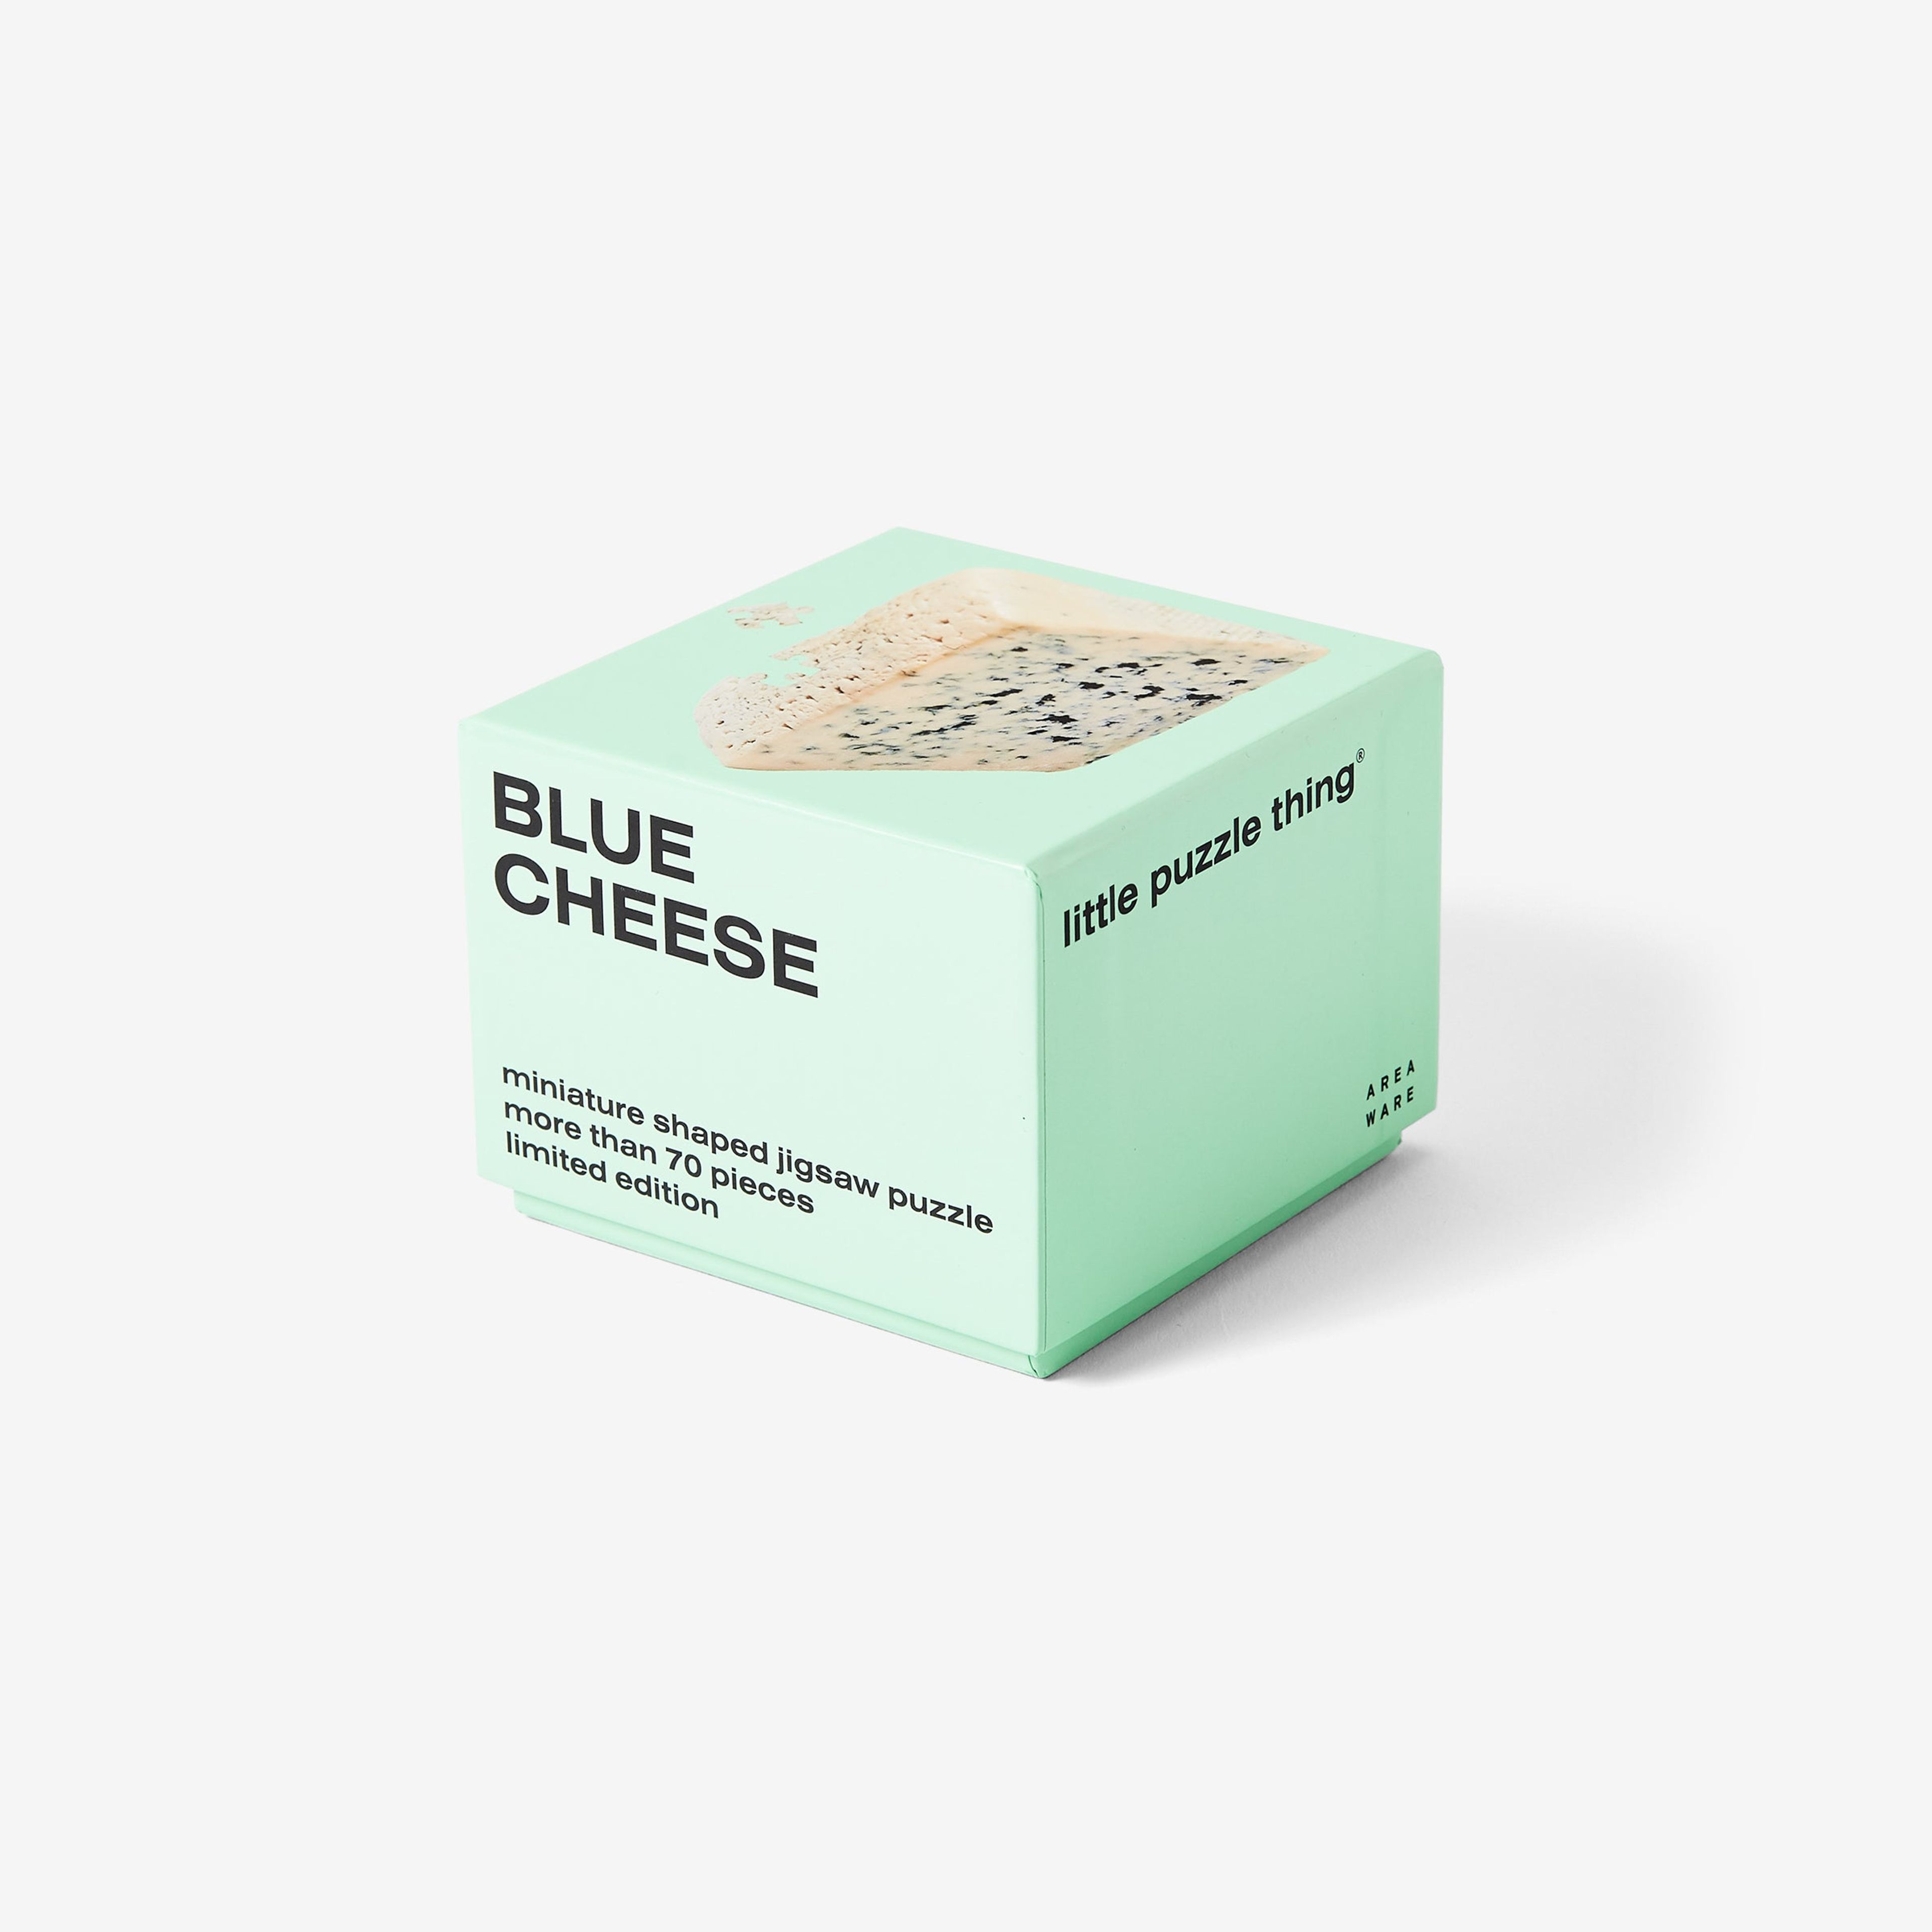 little puzzle thing - Blue Cheese